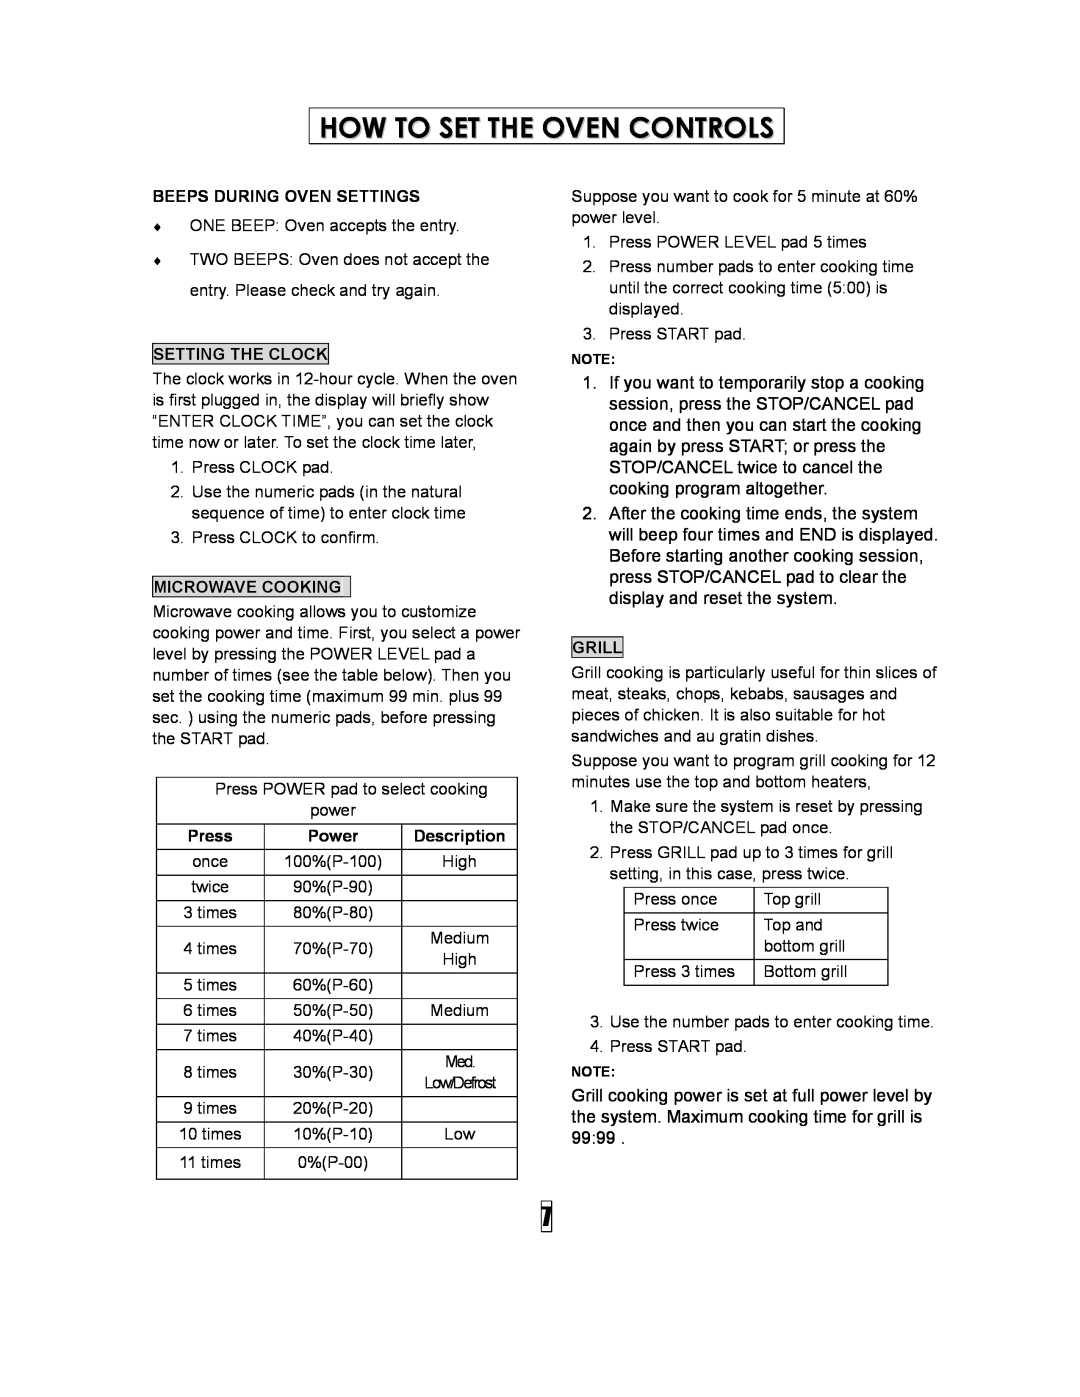 Curtis SMW5500 owner manual How To Set The Oven Controls, times 